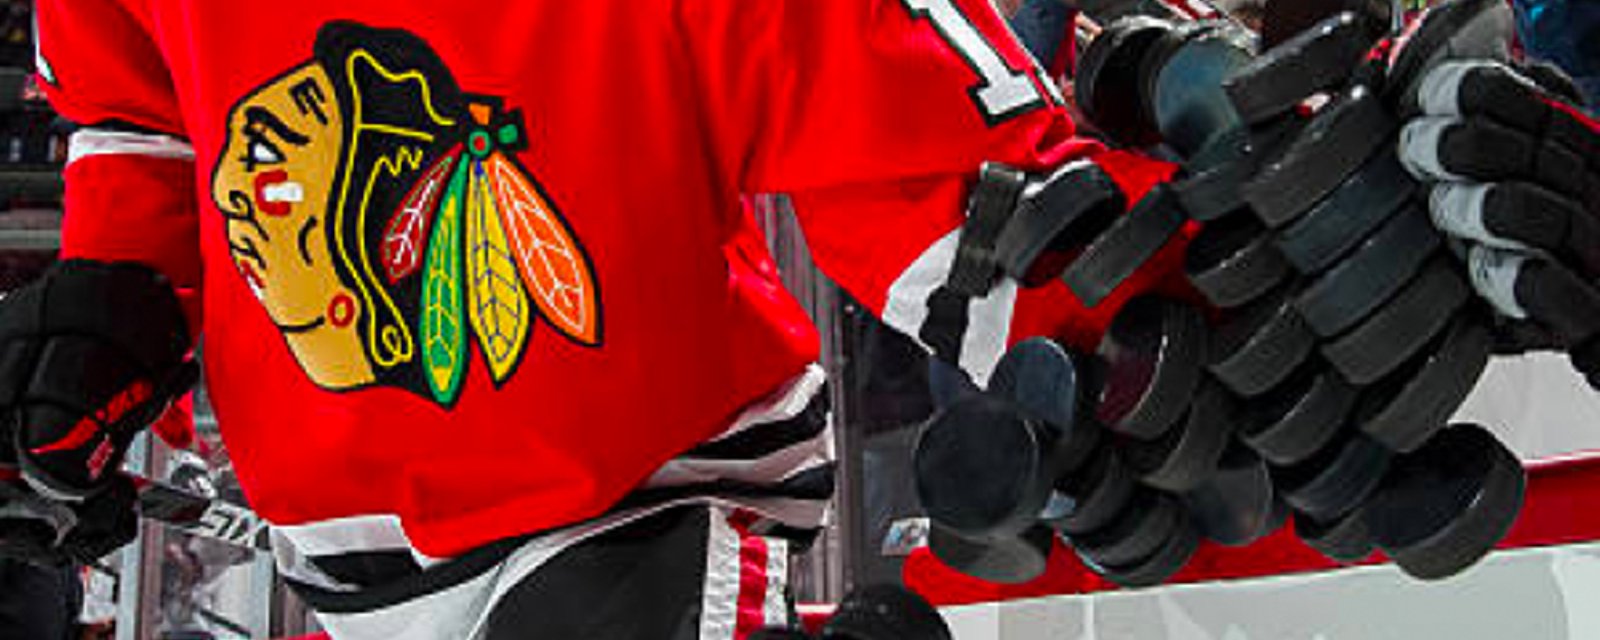 Former Blackhawks coach Paul Vincent gives detailed account of player abuse